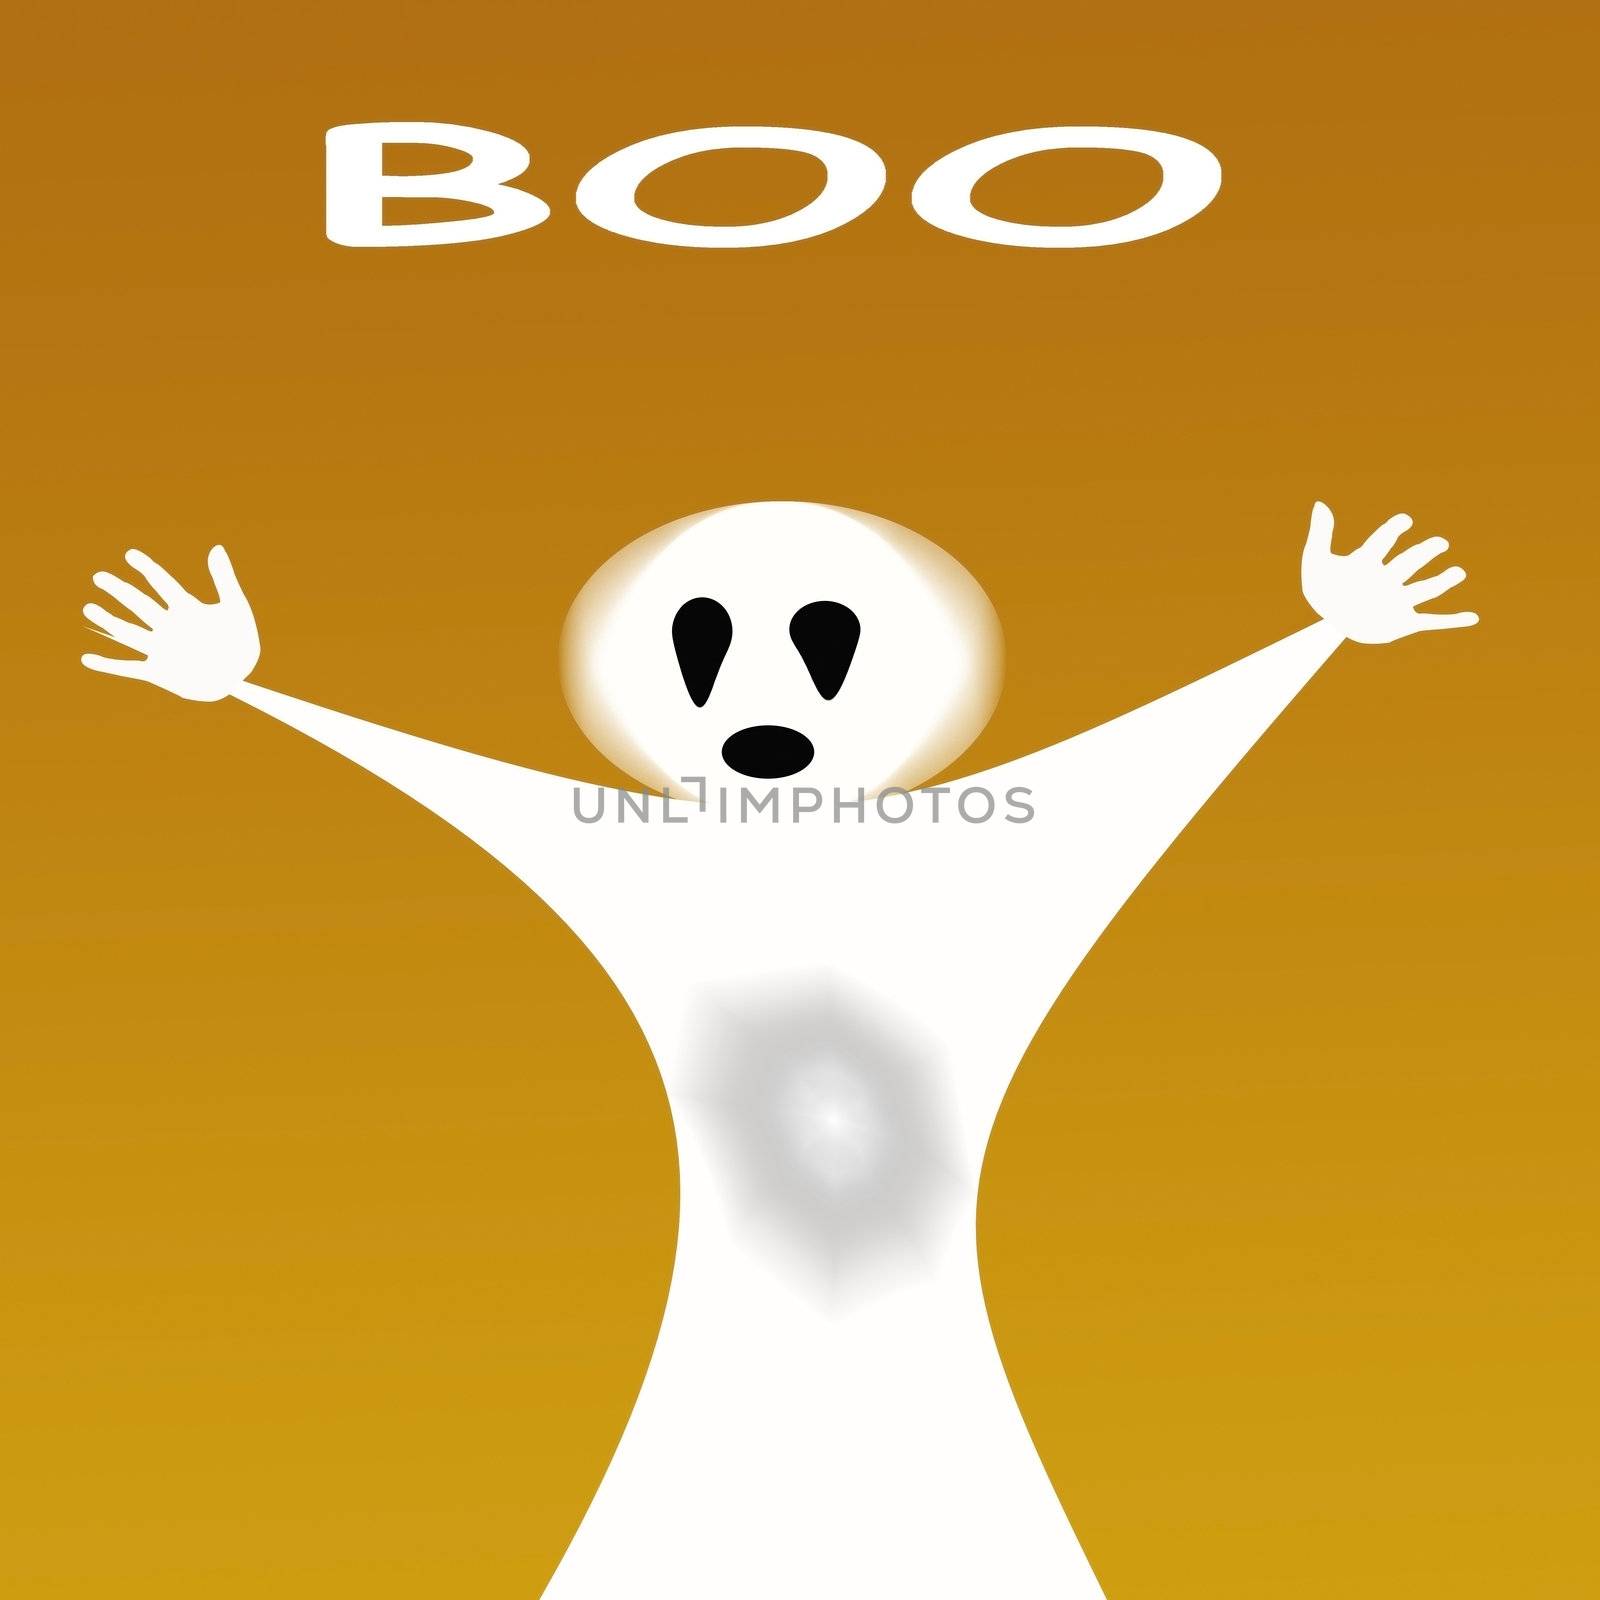 Ghost Boo by hicster